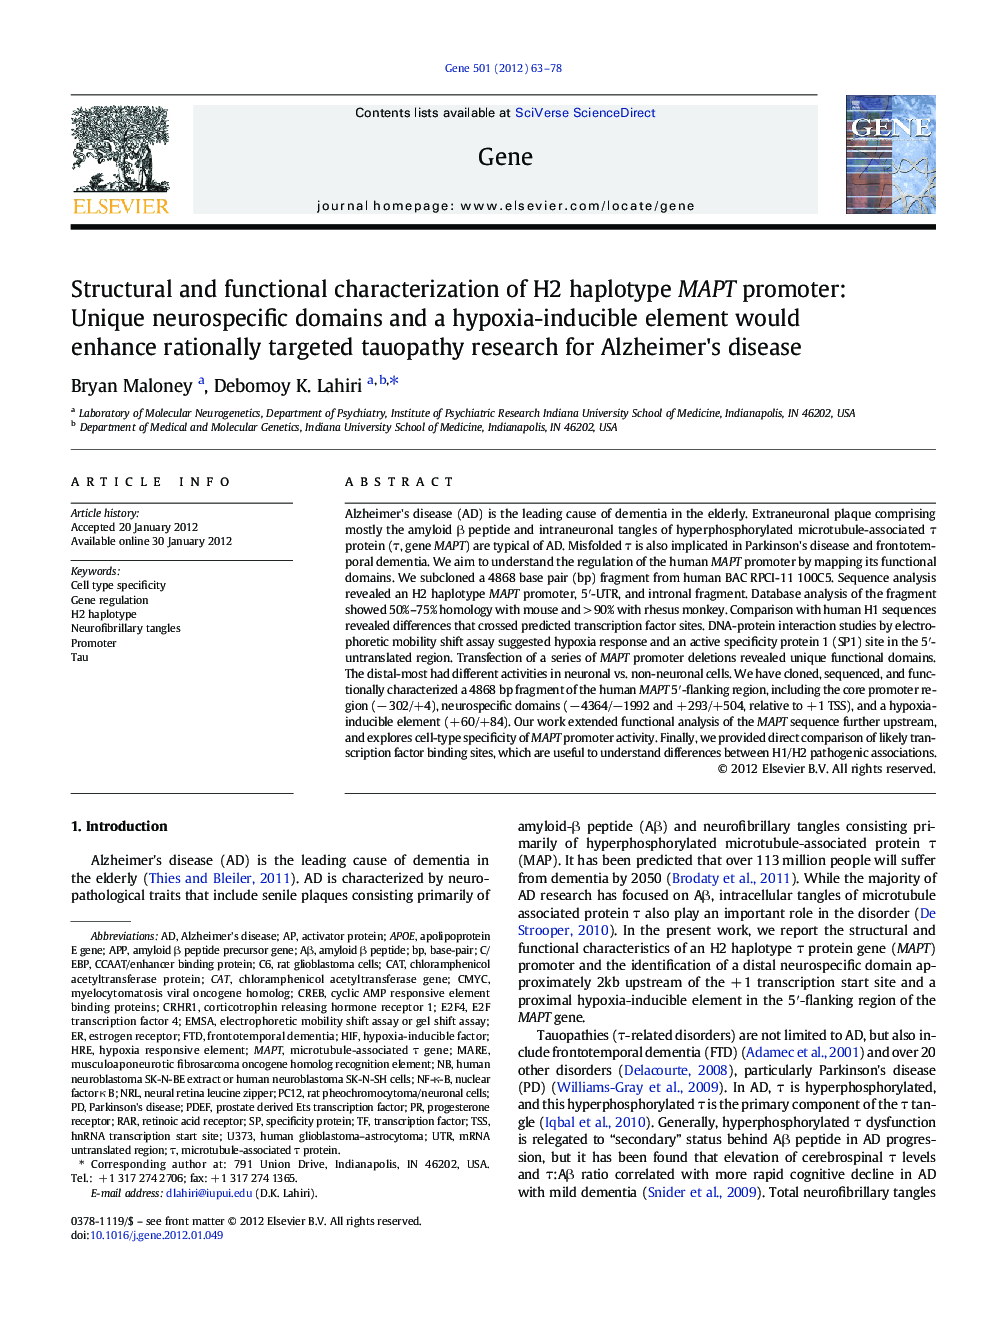 Structural and functional characterization of H2 haplotype MAPT promoter: Unique neurospecific domains and a hypoxia-inducible element would enhance rationally targeted tauopathy research for Alzheimer's disease